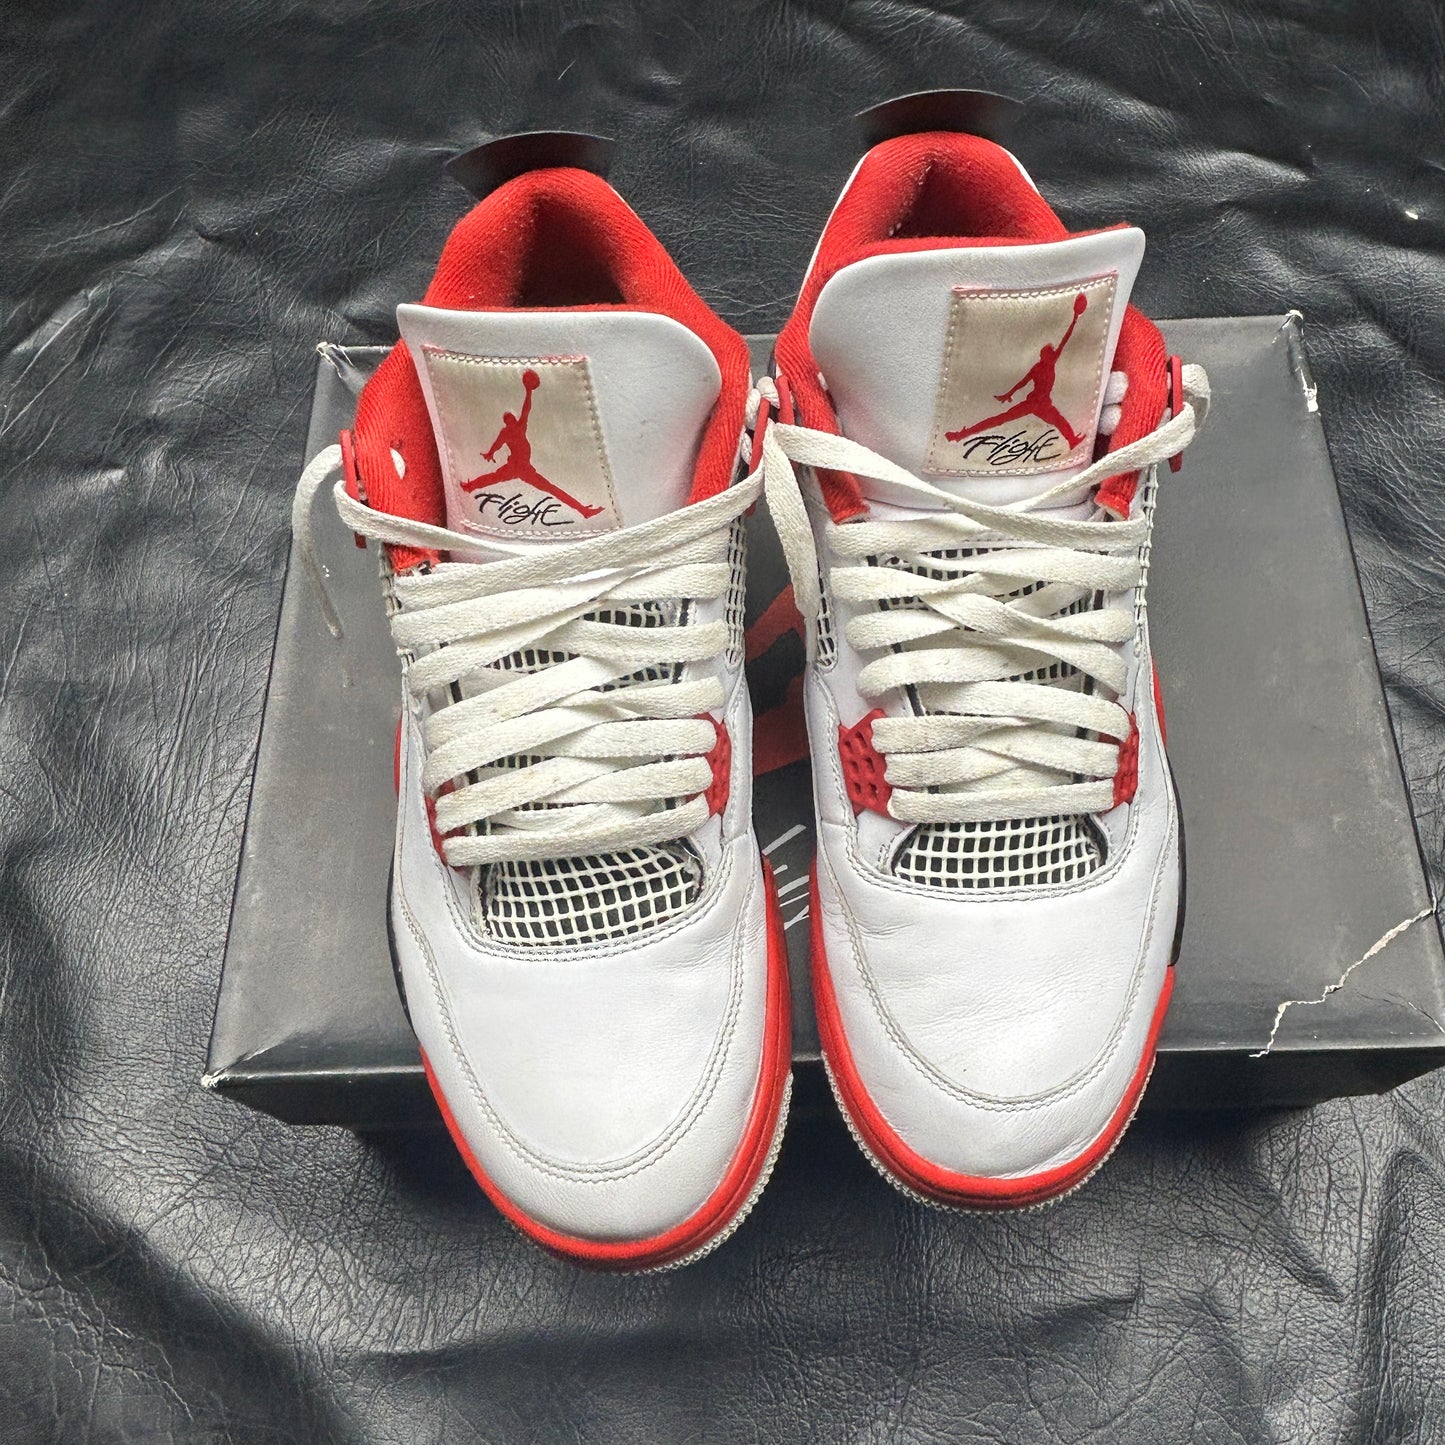 Jordan 4 Retro Fire Red (2020) (Pre-Owned) Size 10.5